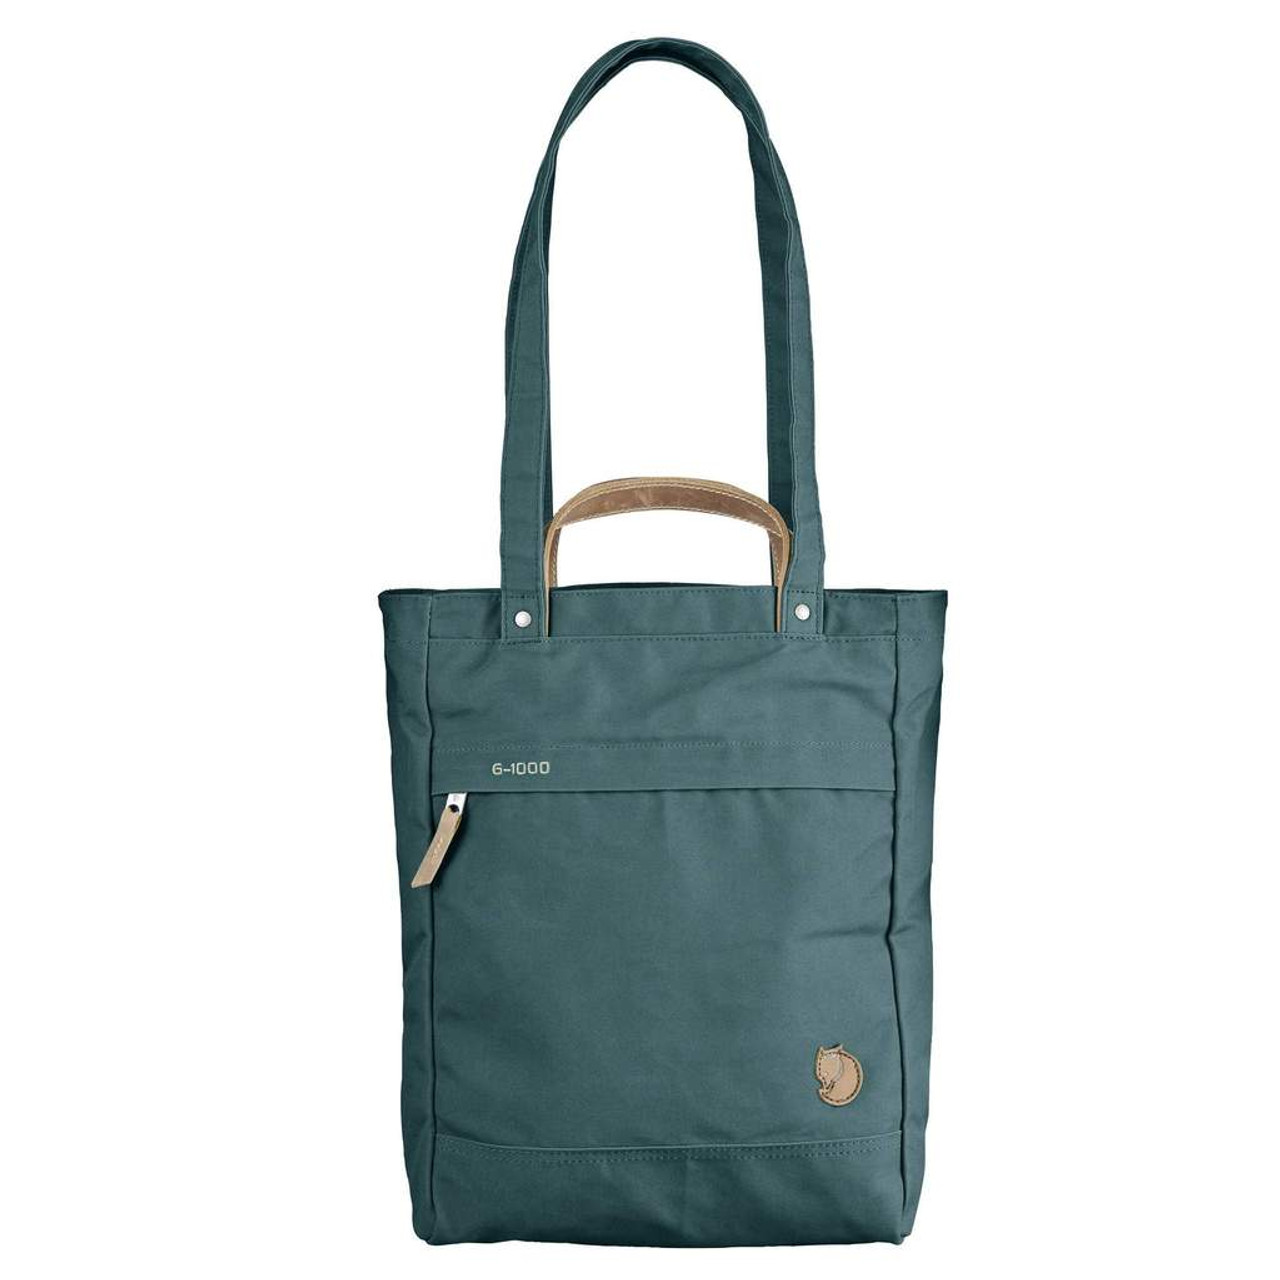 Fjall Raven Totepack No.1 Bag Frost Green OneSize